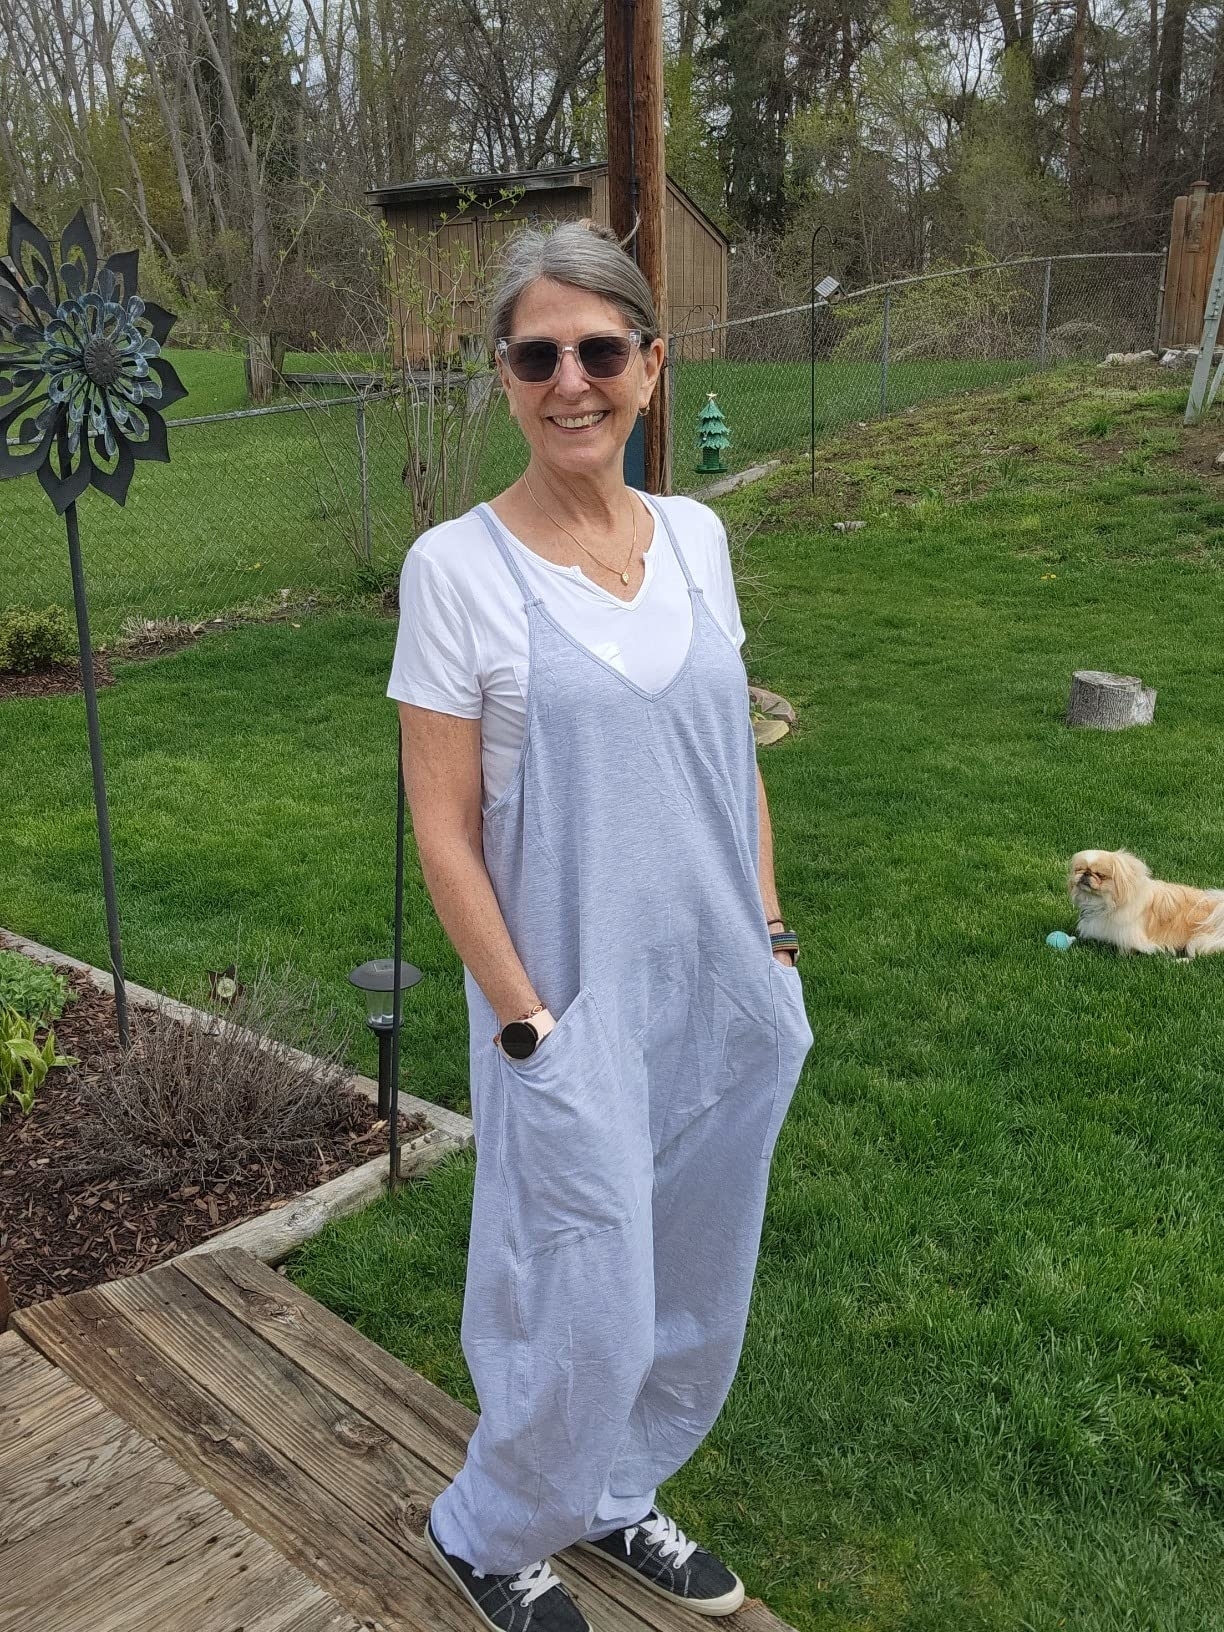 Model in casual jumpsuit with layered top, sneakers, standing in a garden with a dog in the background